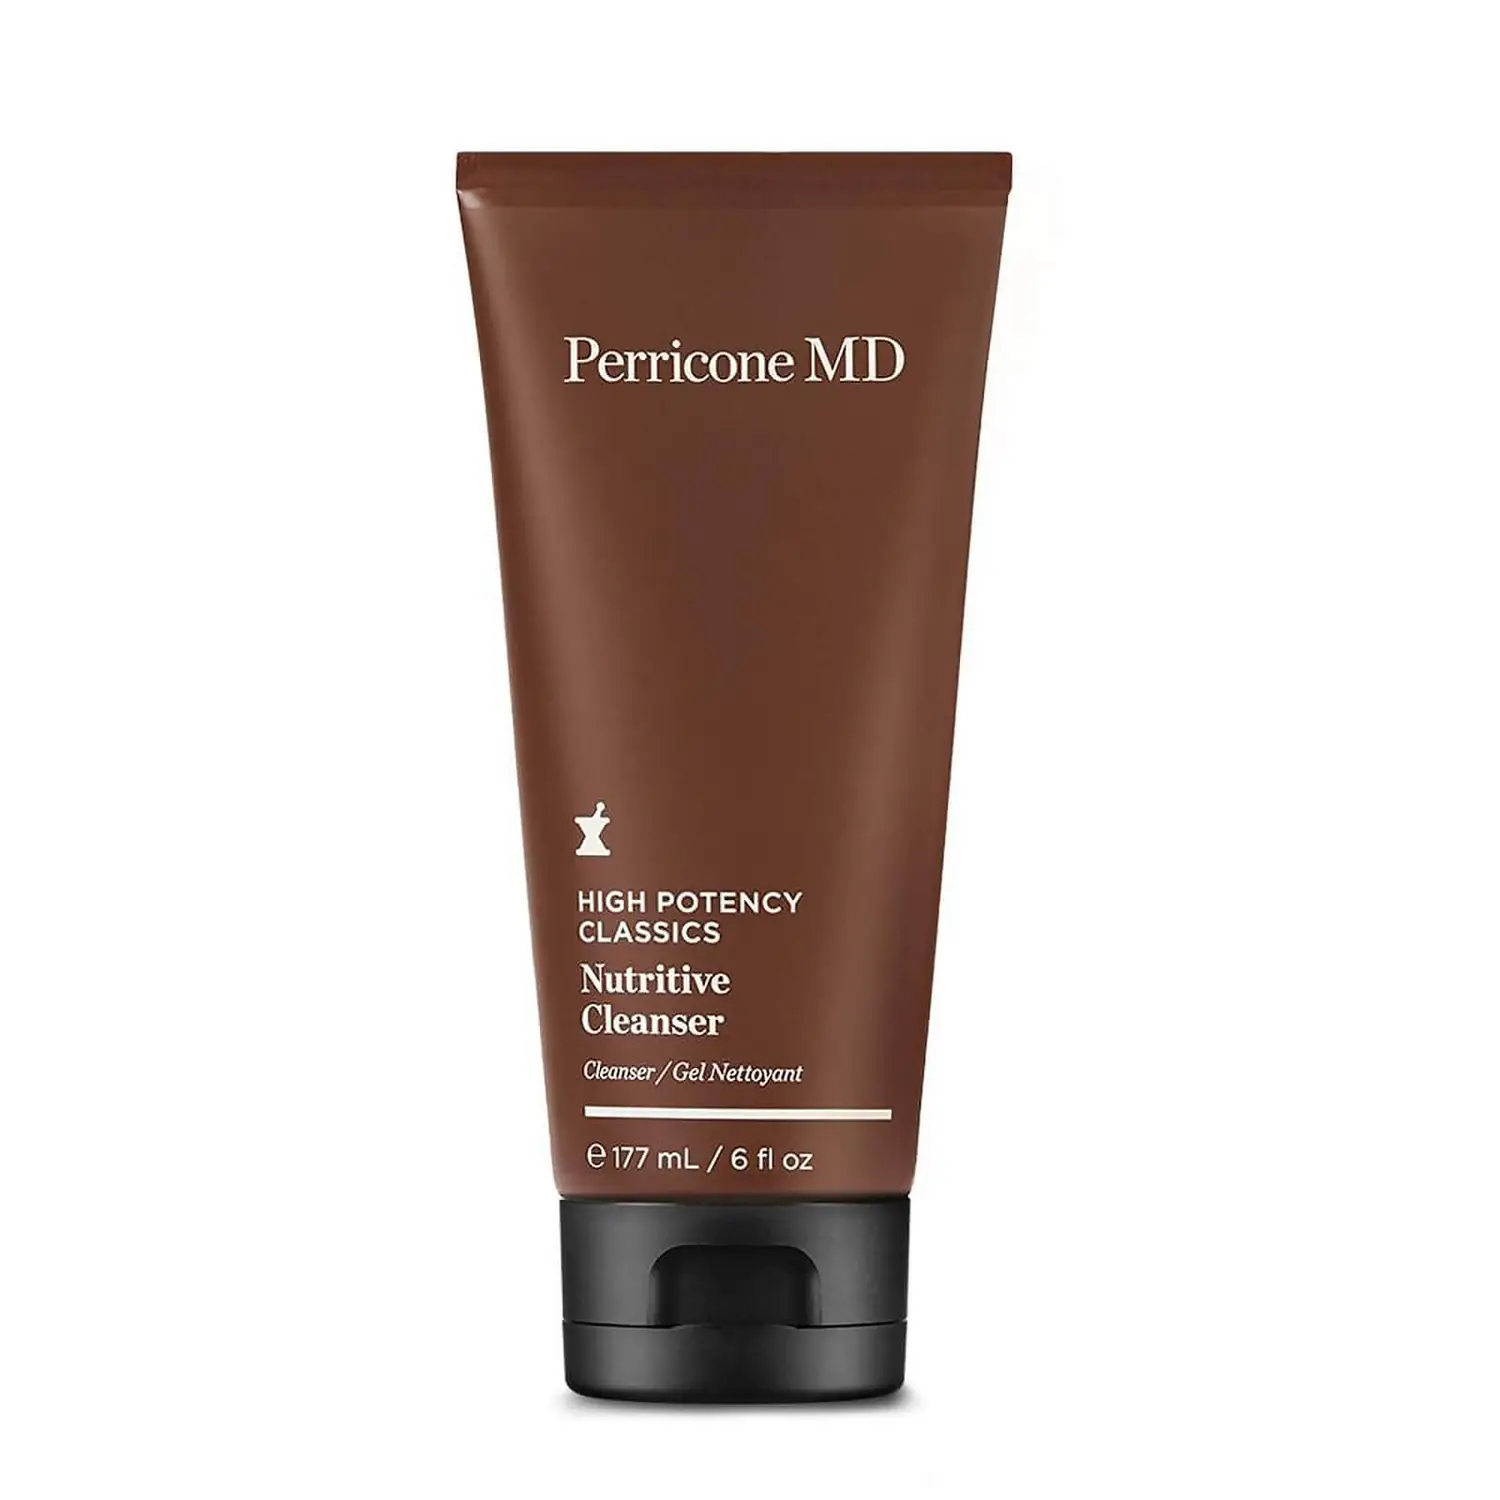 Гель для умывания Perricone MD High Potency Classics Nutritive Cleanser 177 мл the remains of the day faber classics